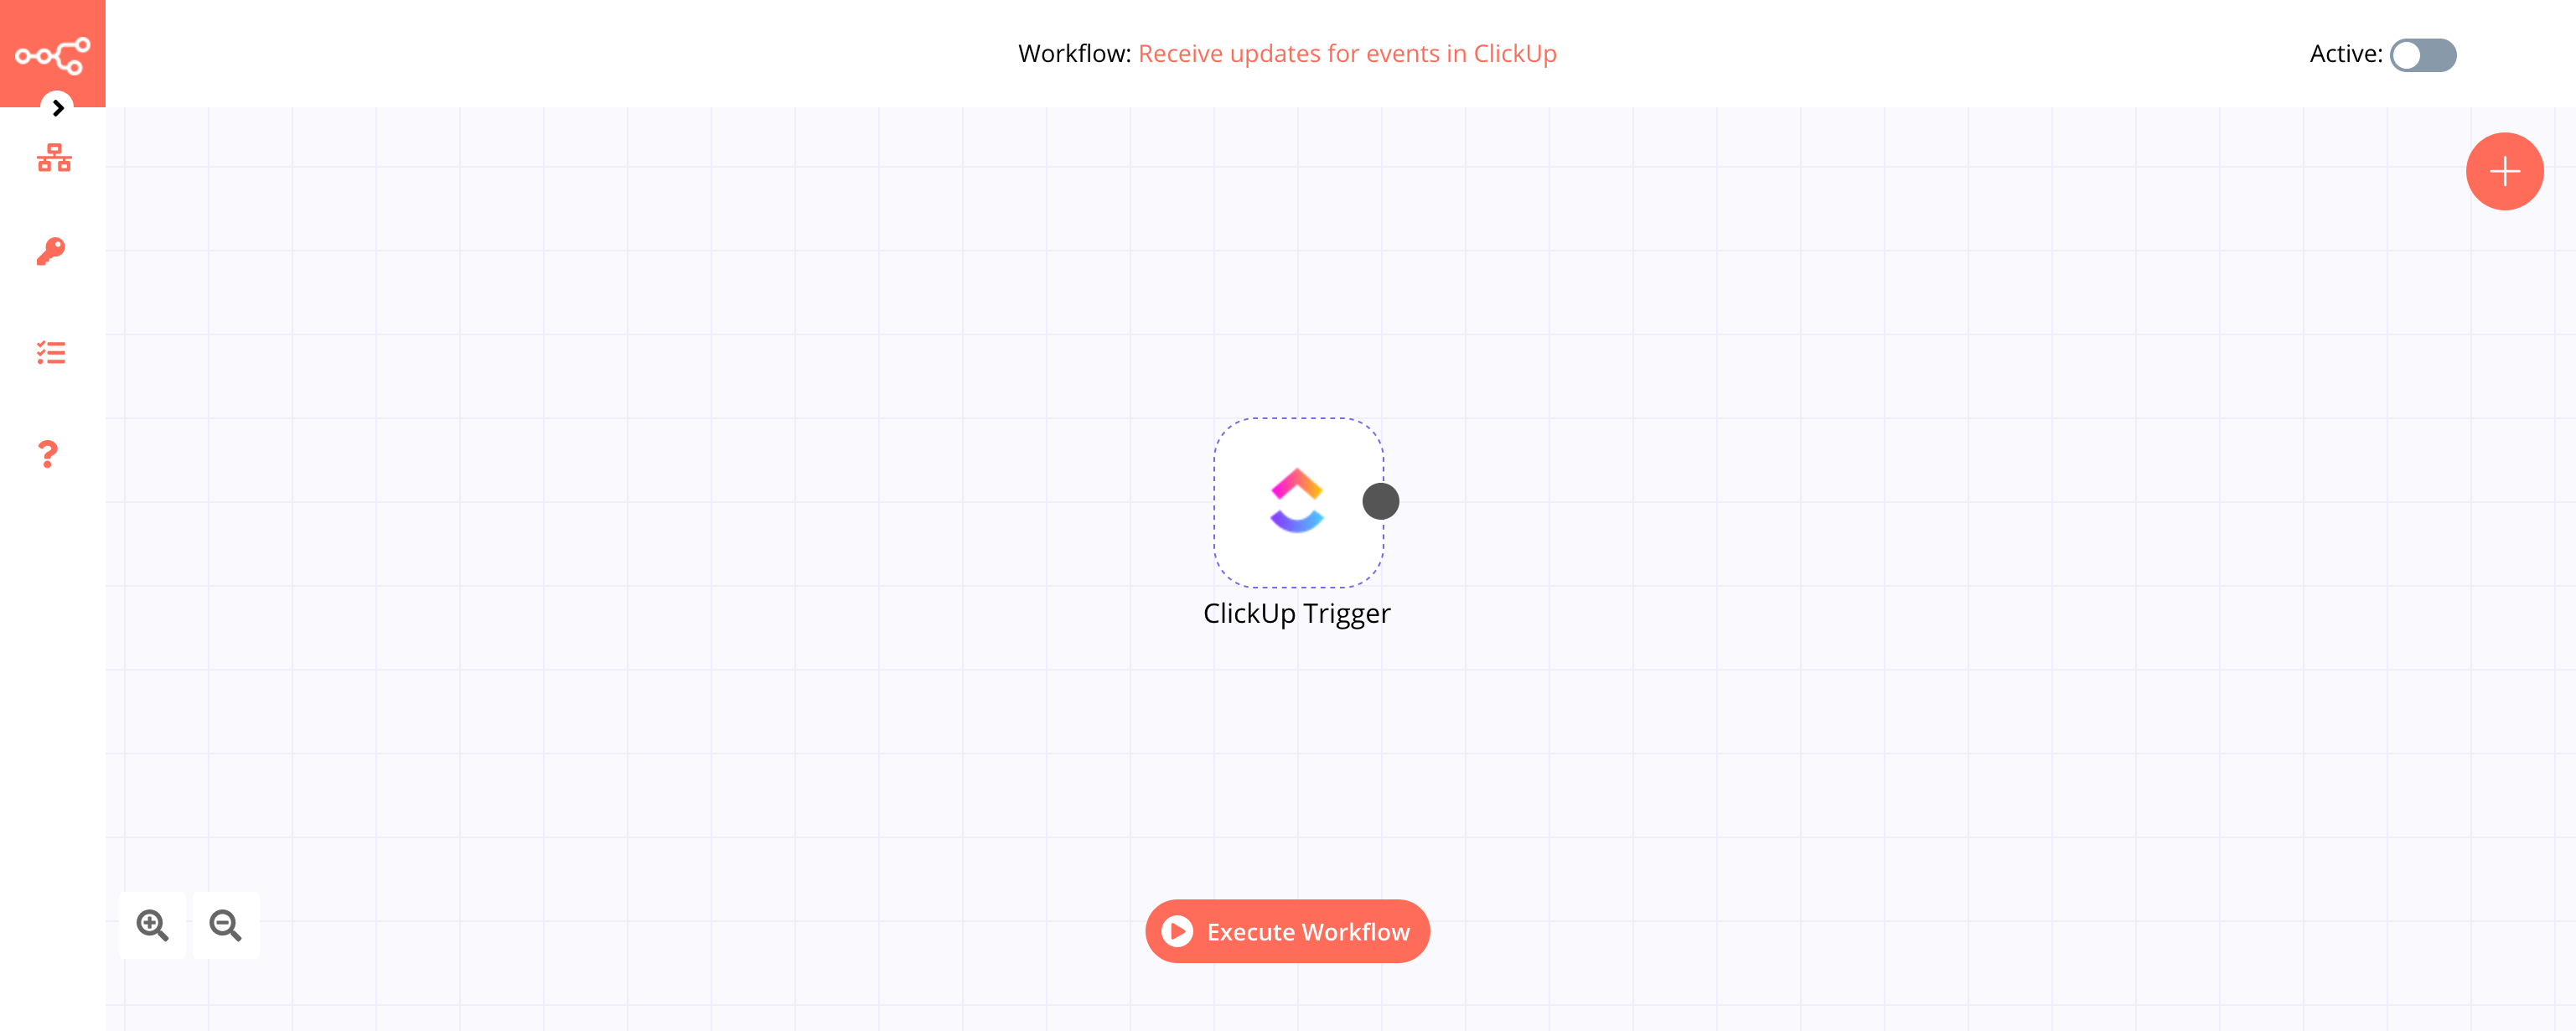 A workflow with the ClickUp Trigger node